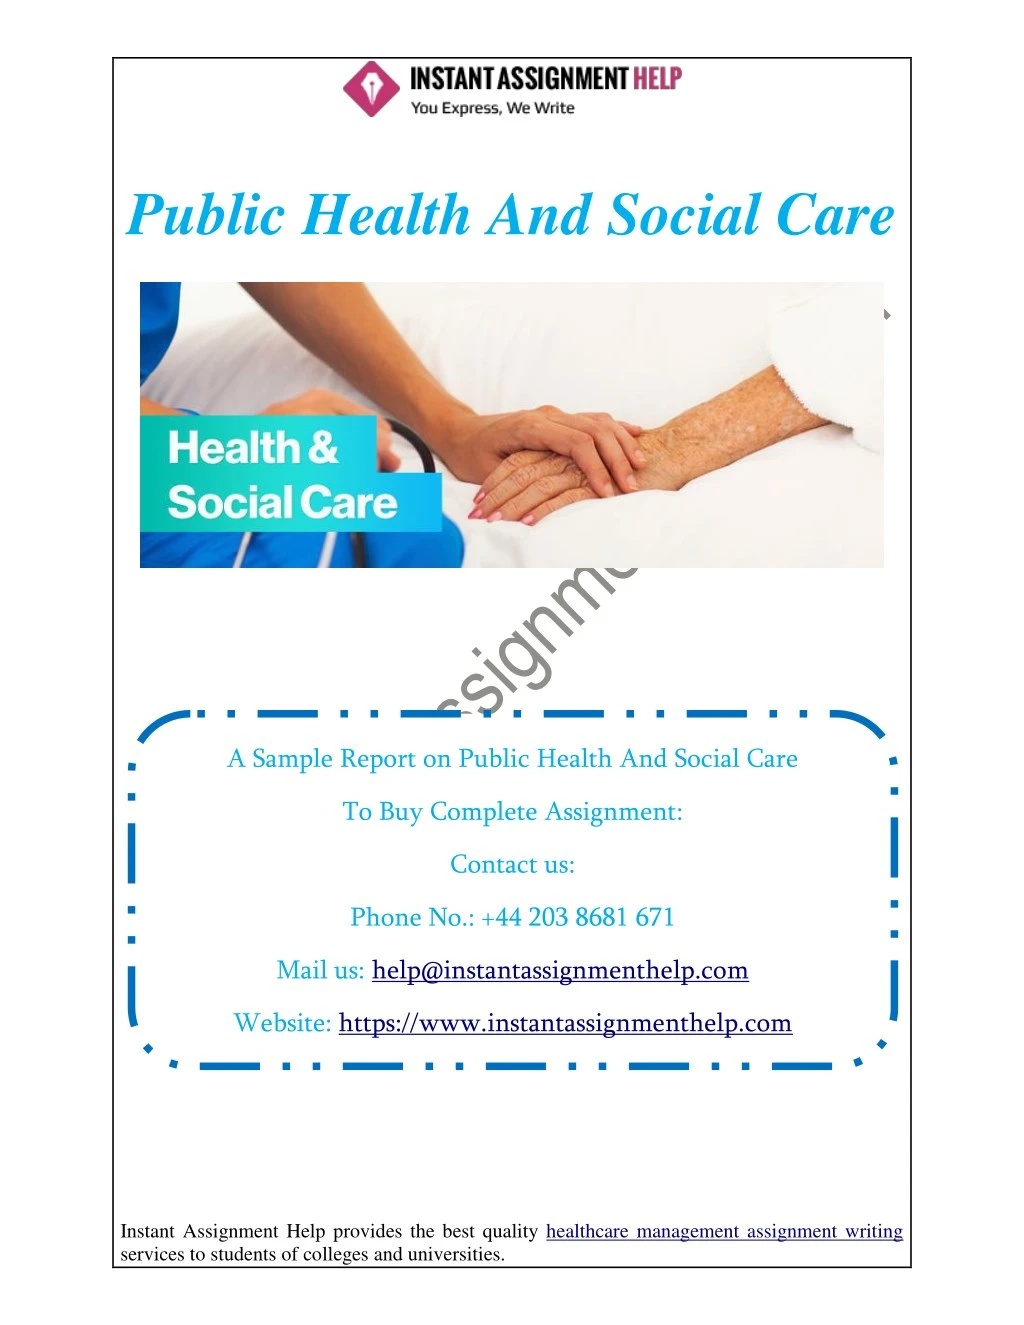 public health and social care